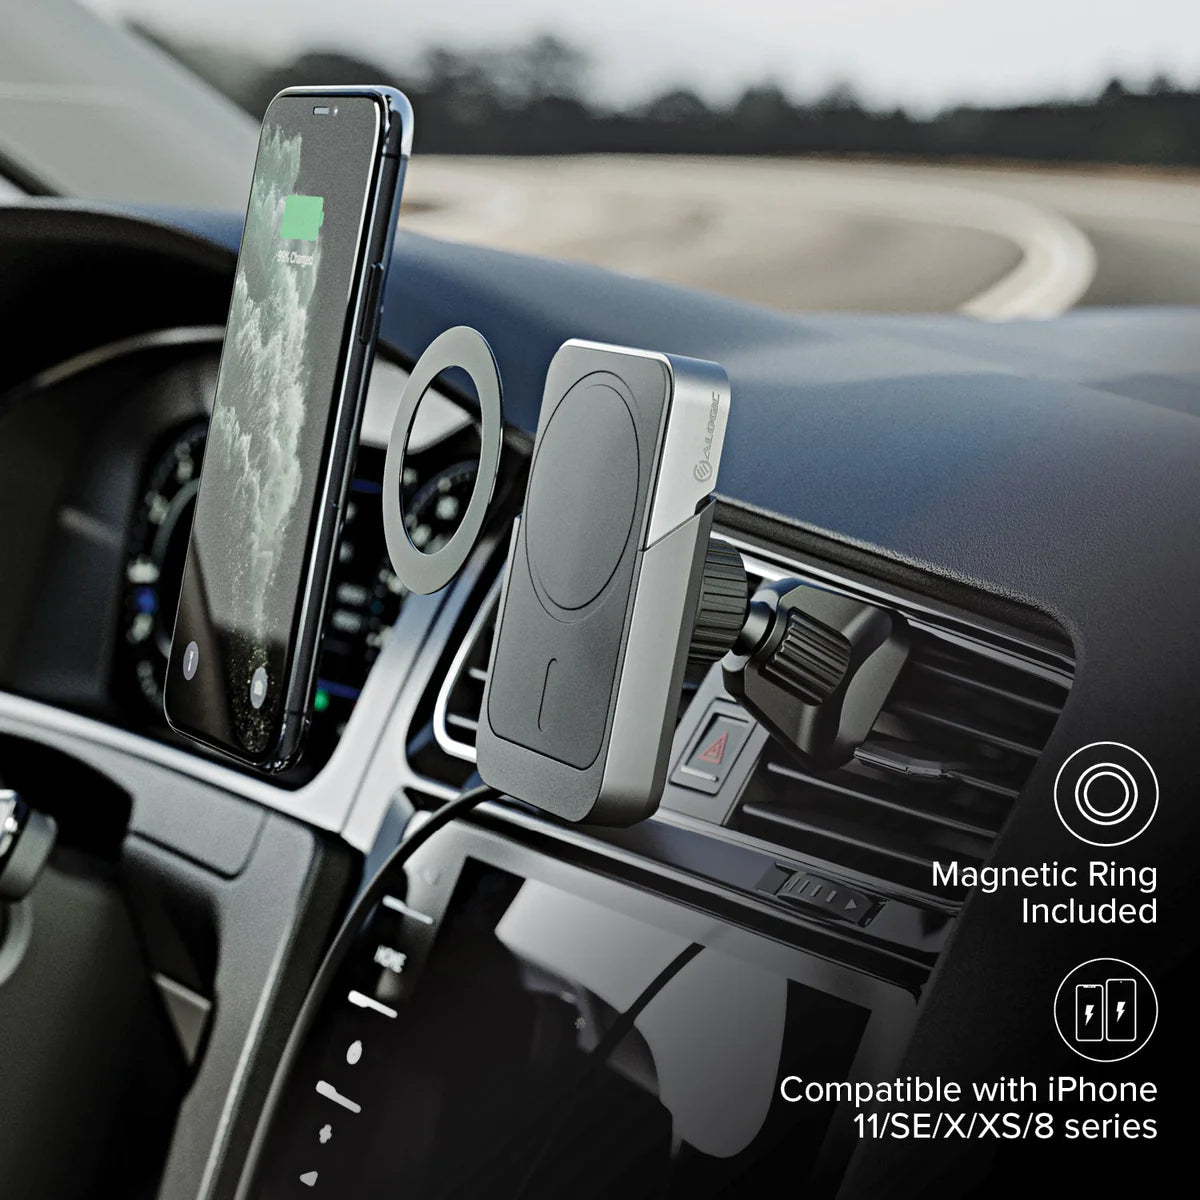 matrix-universal-magnetic-car-charger-with-air-vent-mount-matrix-universal-magnetic-power-bank-5000mah_9